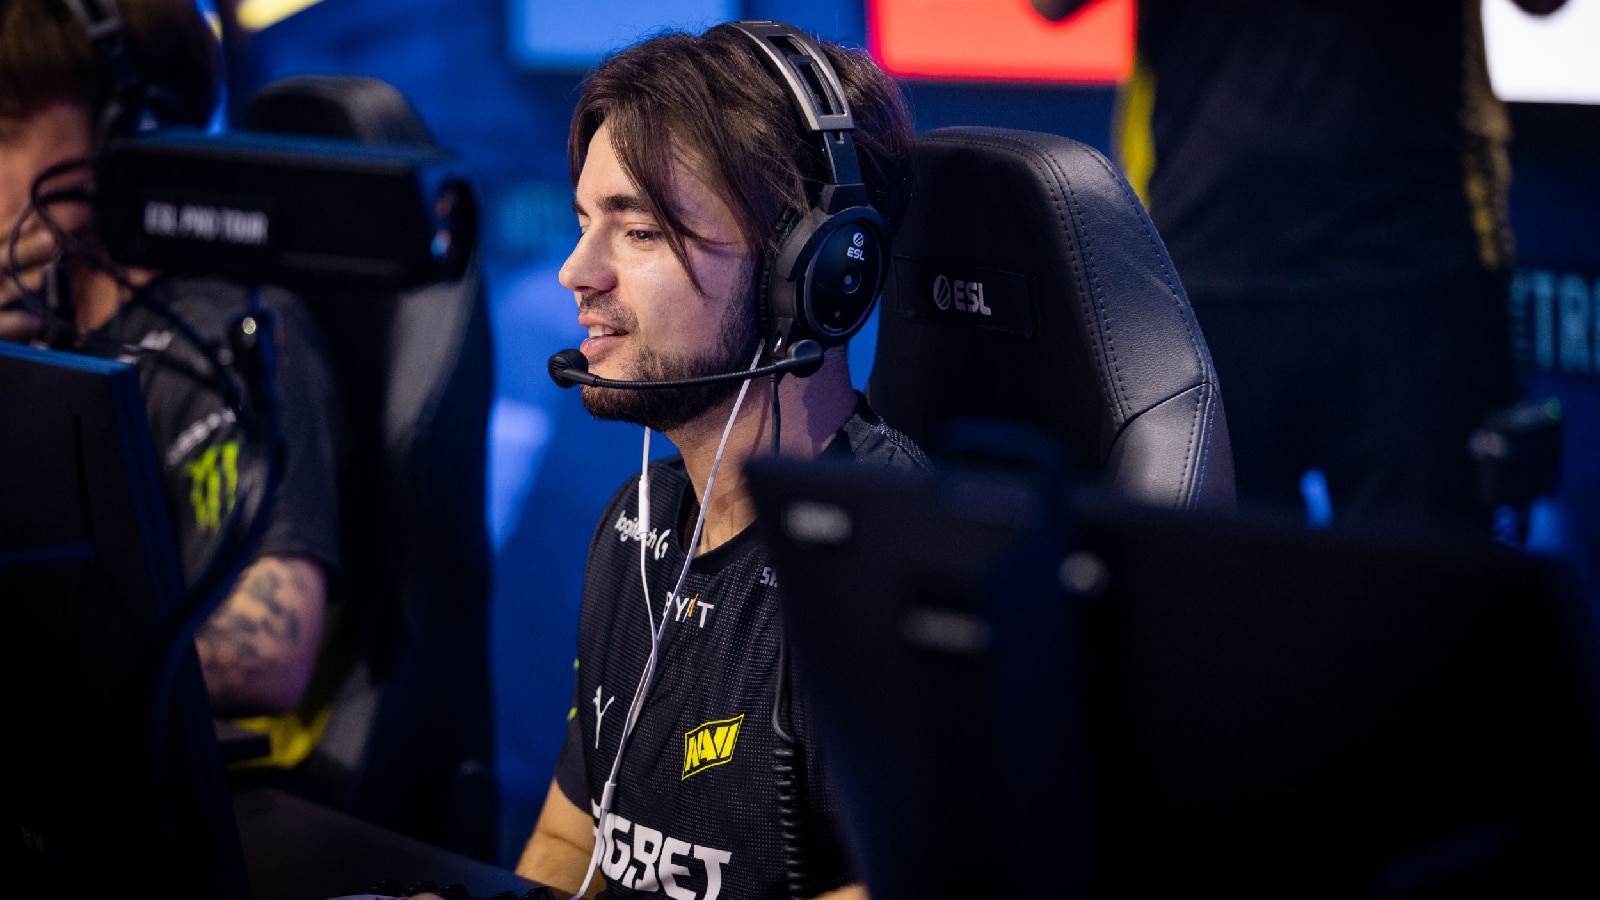 NAVI reportedly in talks to sign FPX Valorant roster - Dexerto